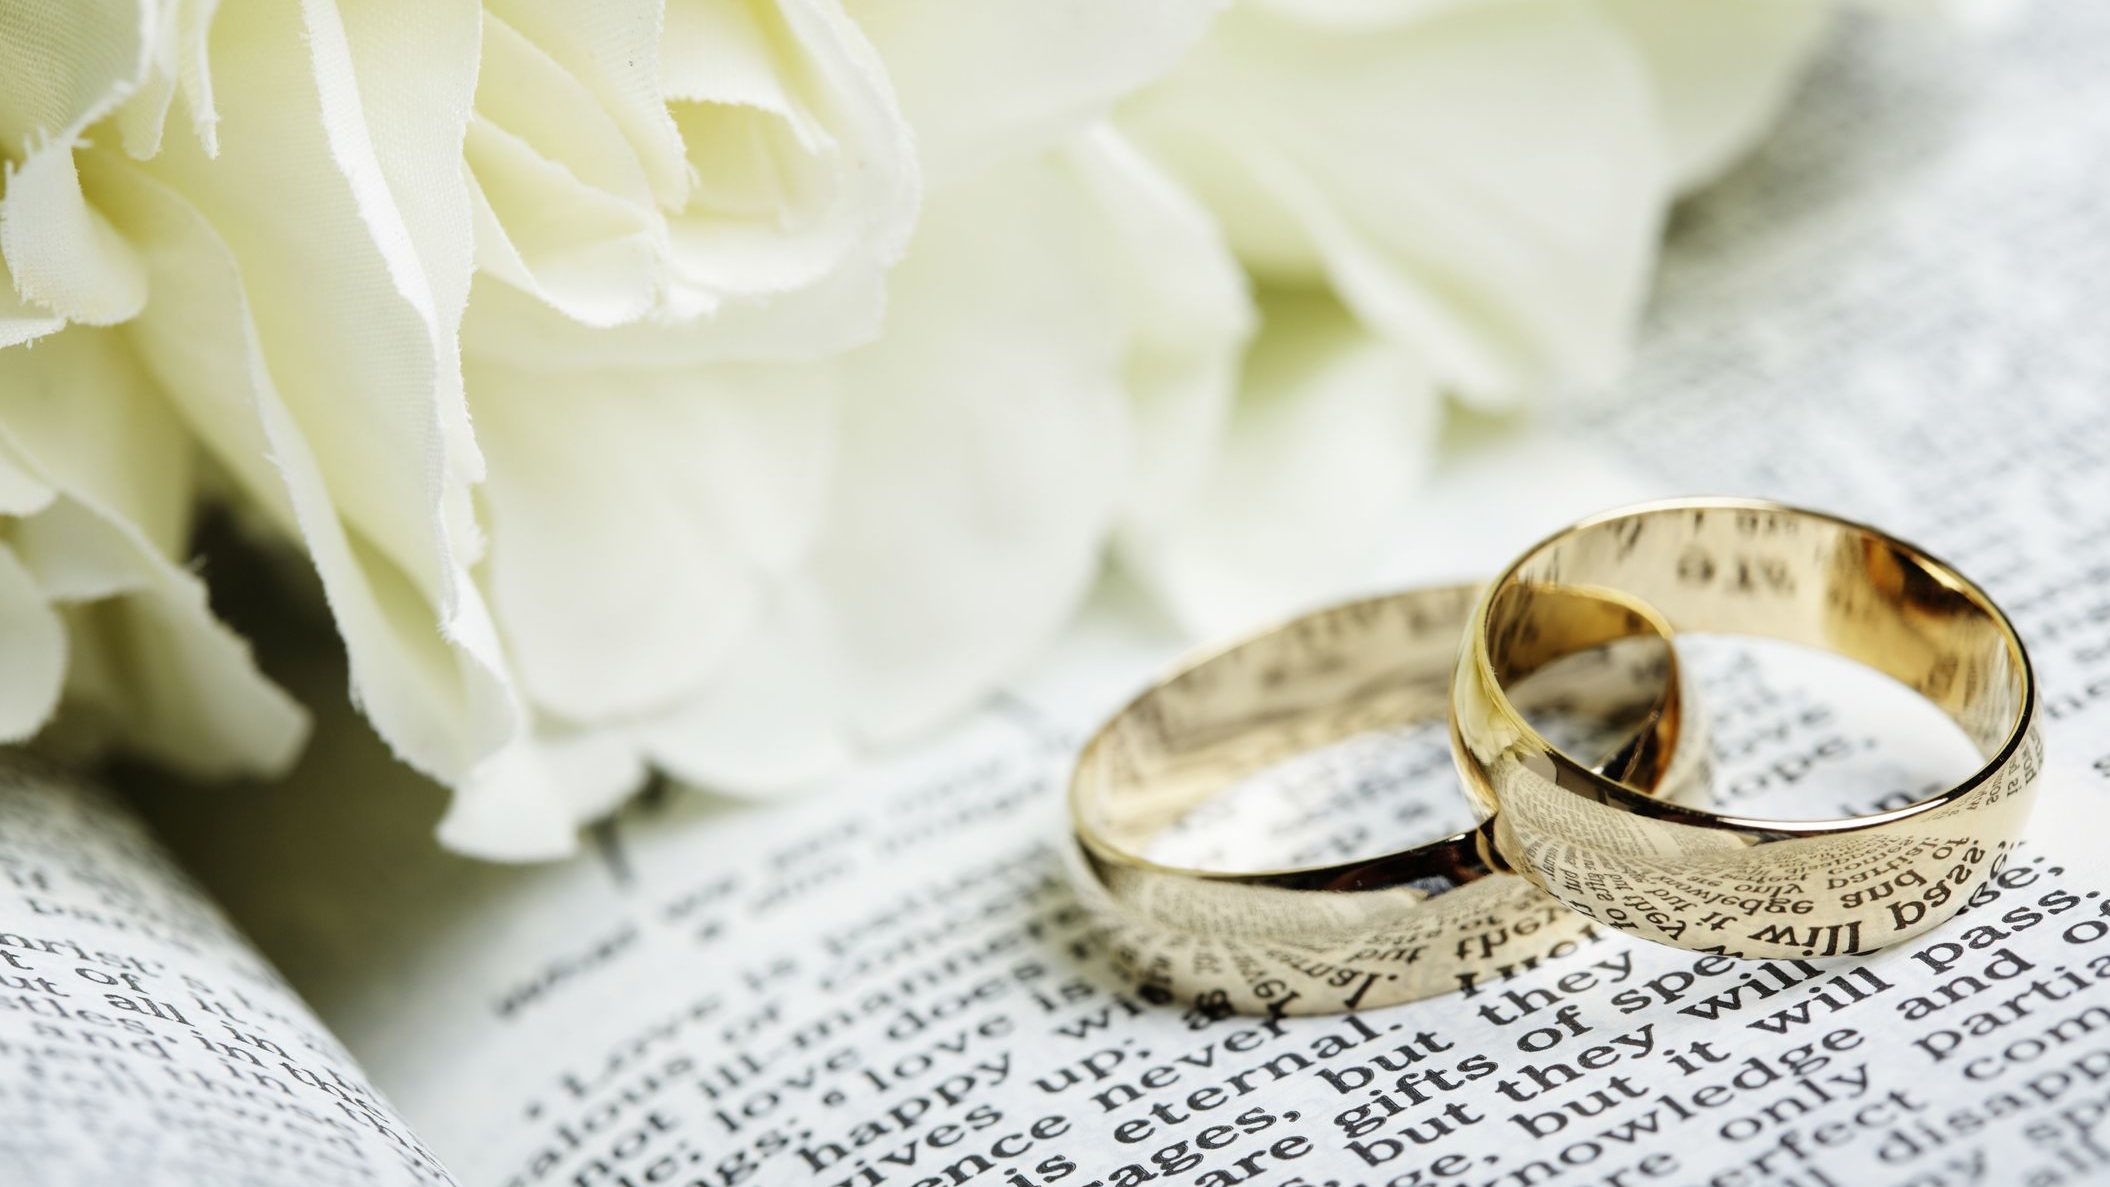 Israel’s ‘New Family’ Facilitates Common-law Marriages For International Couples